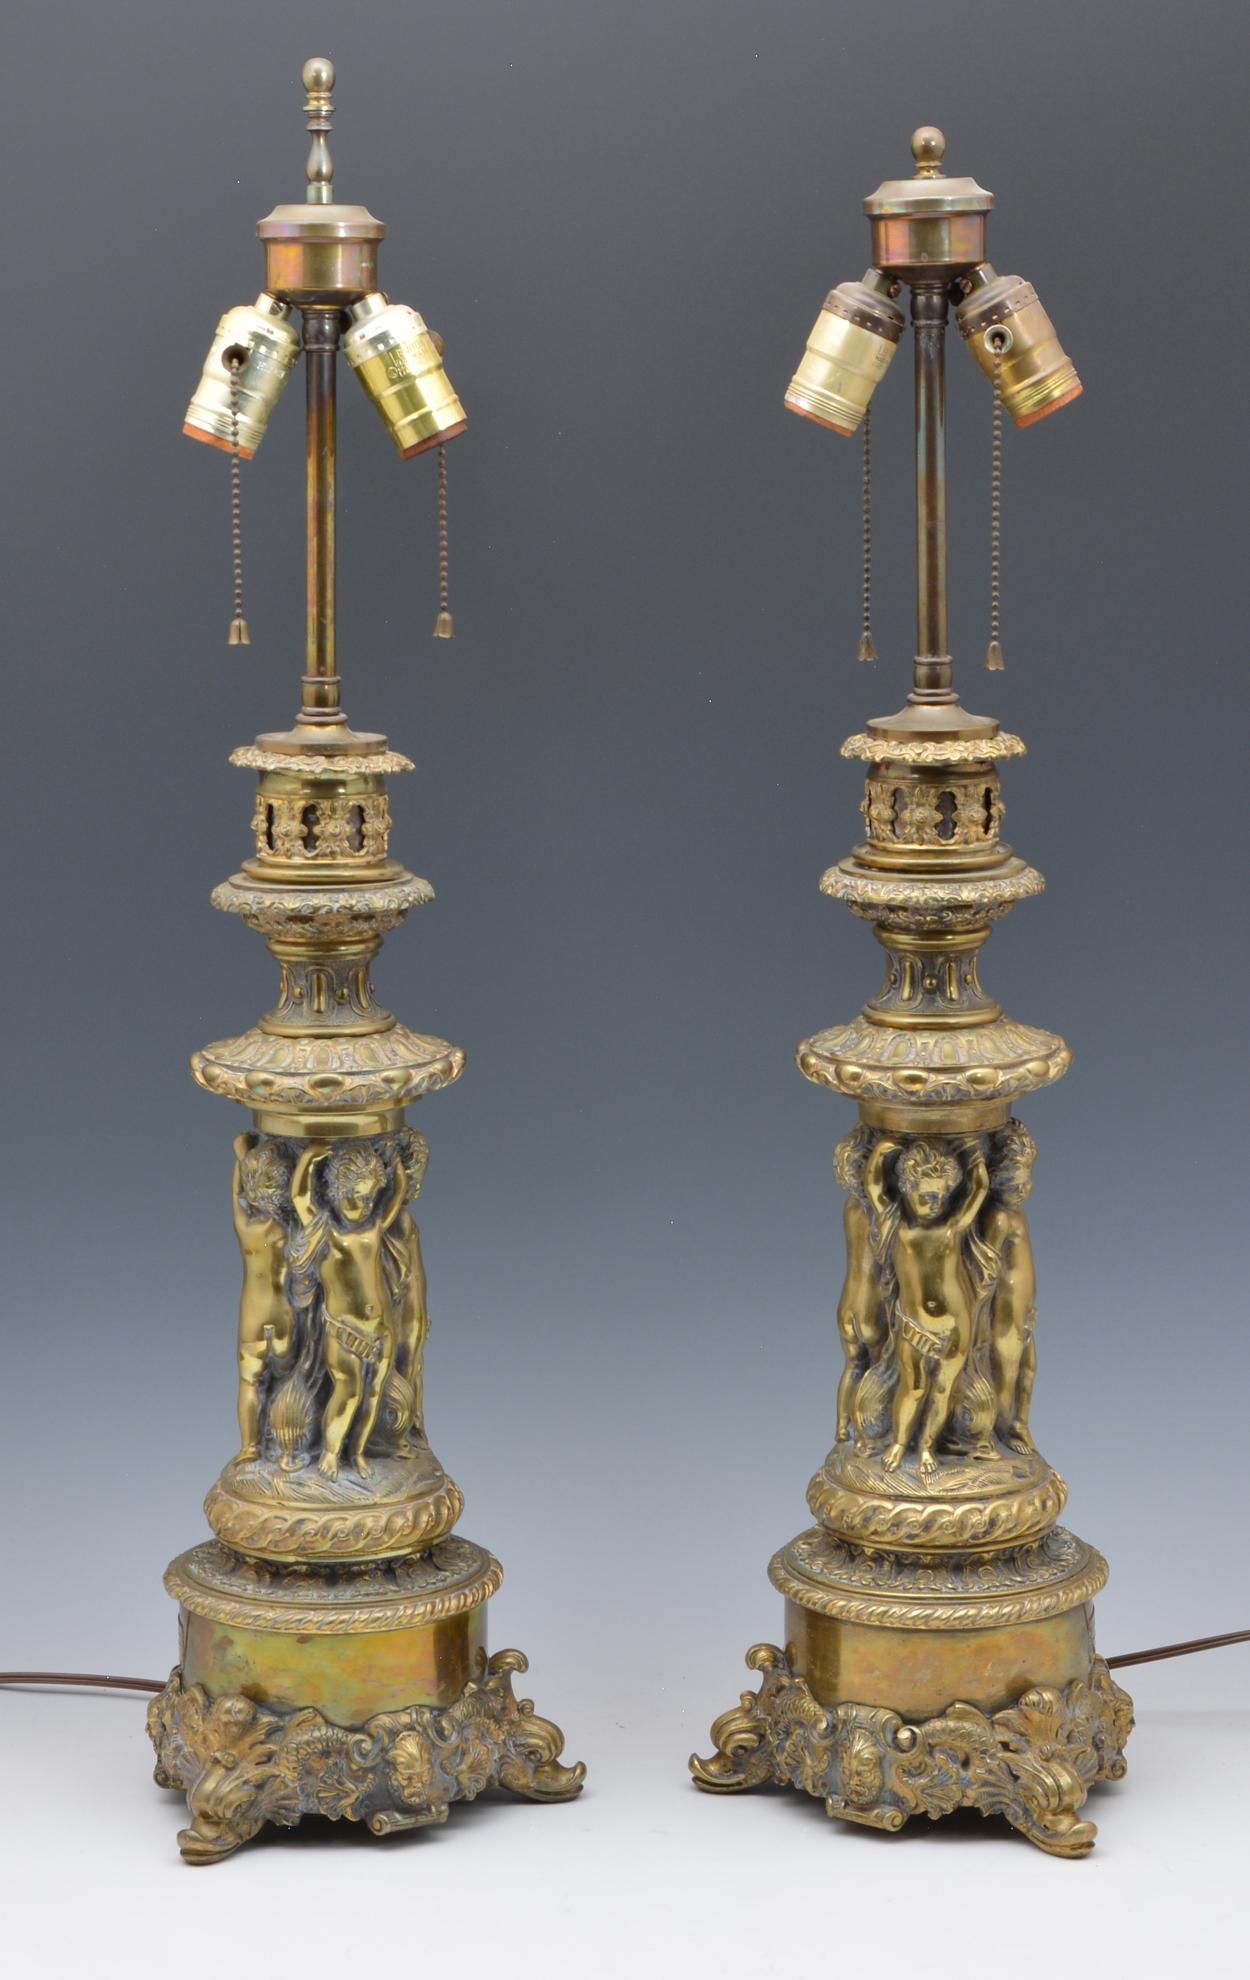 PAIR OF NEOCLASSICAL BRASS TABLE 3d1b56